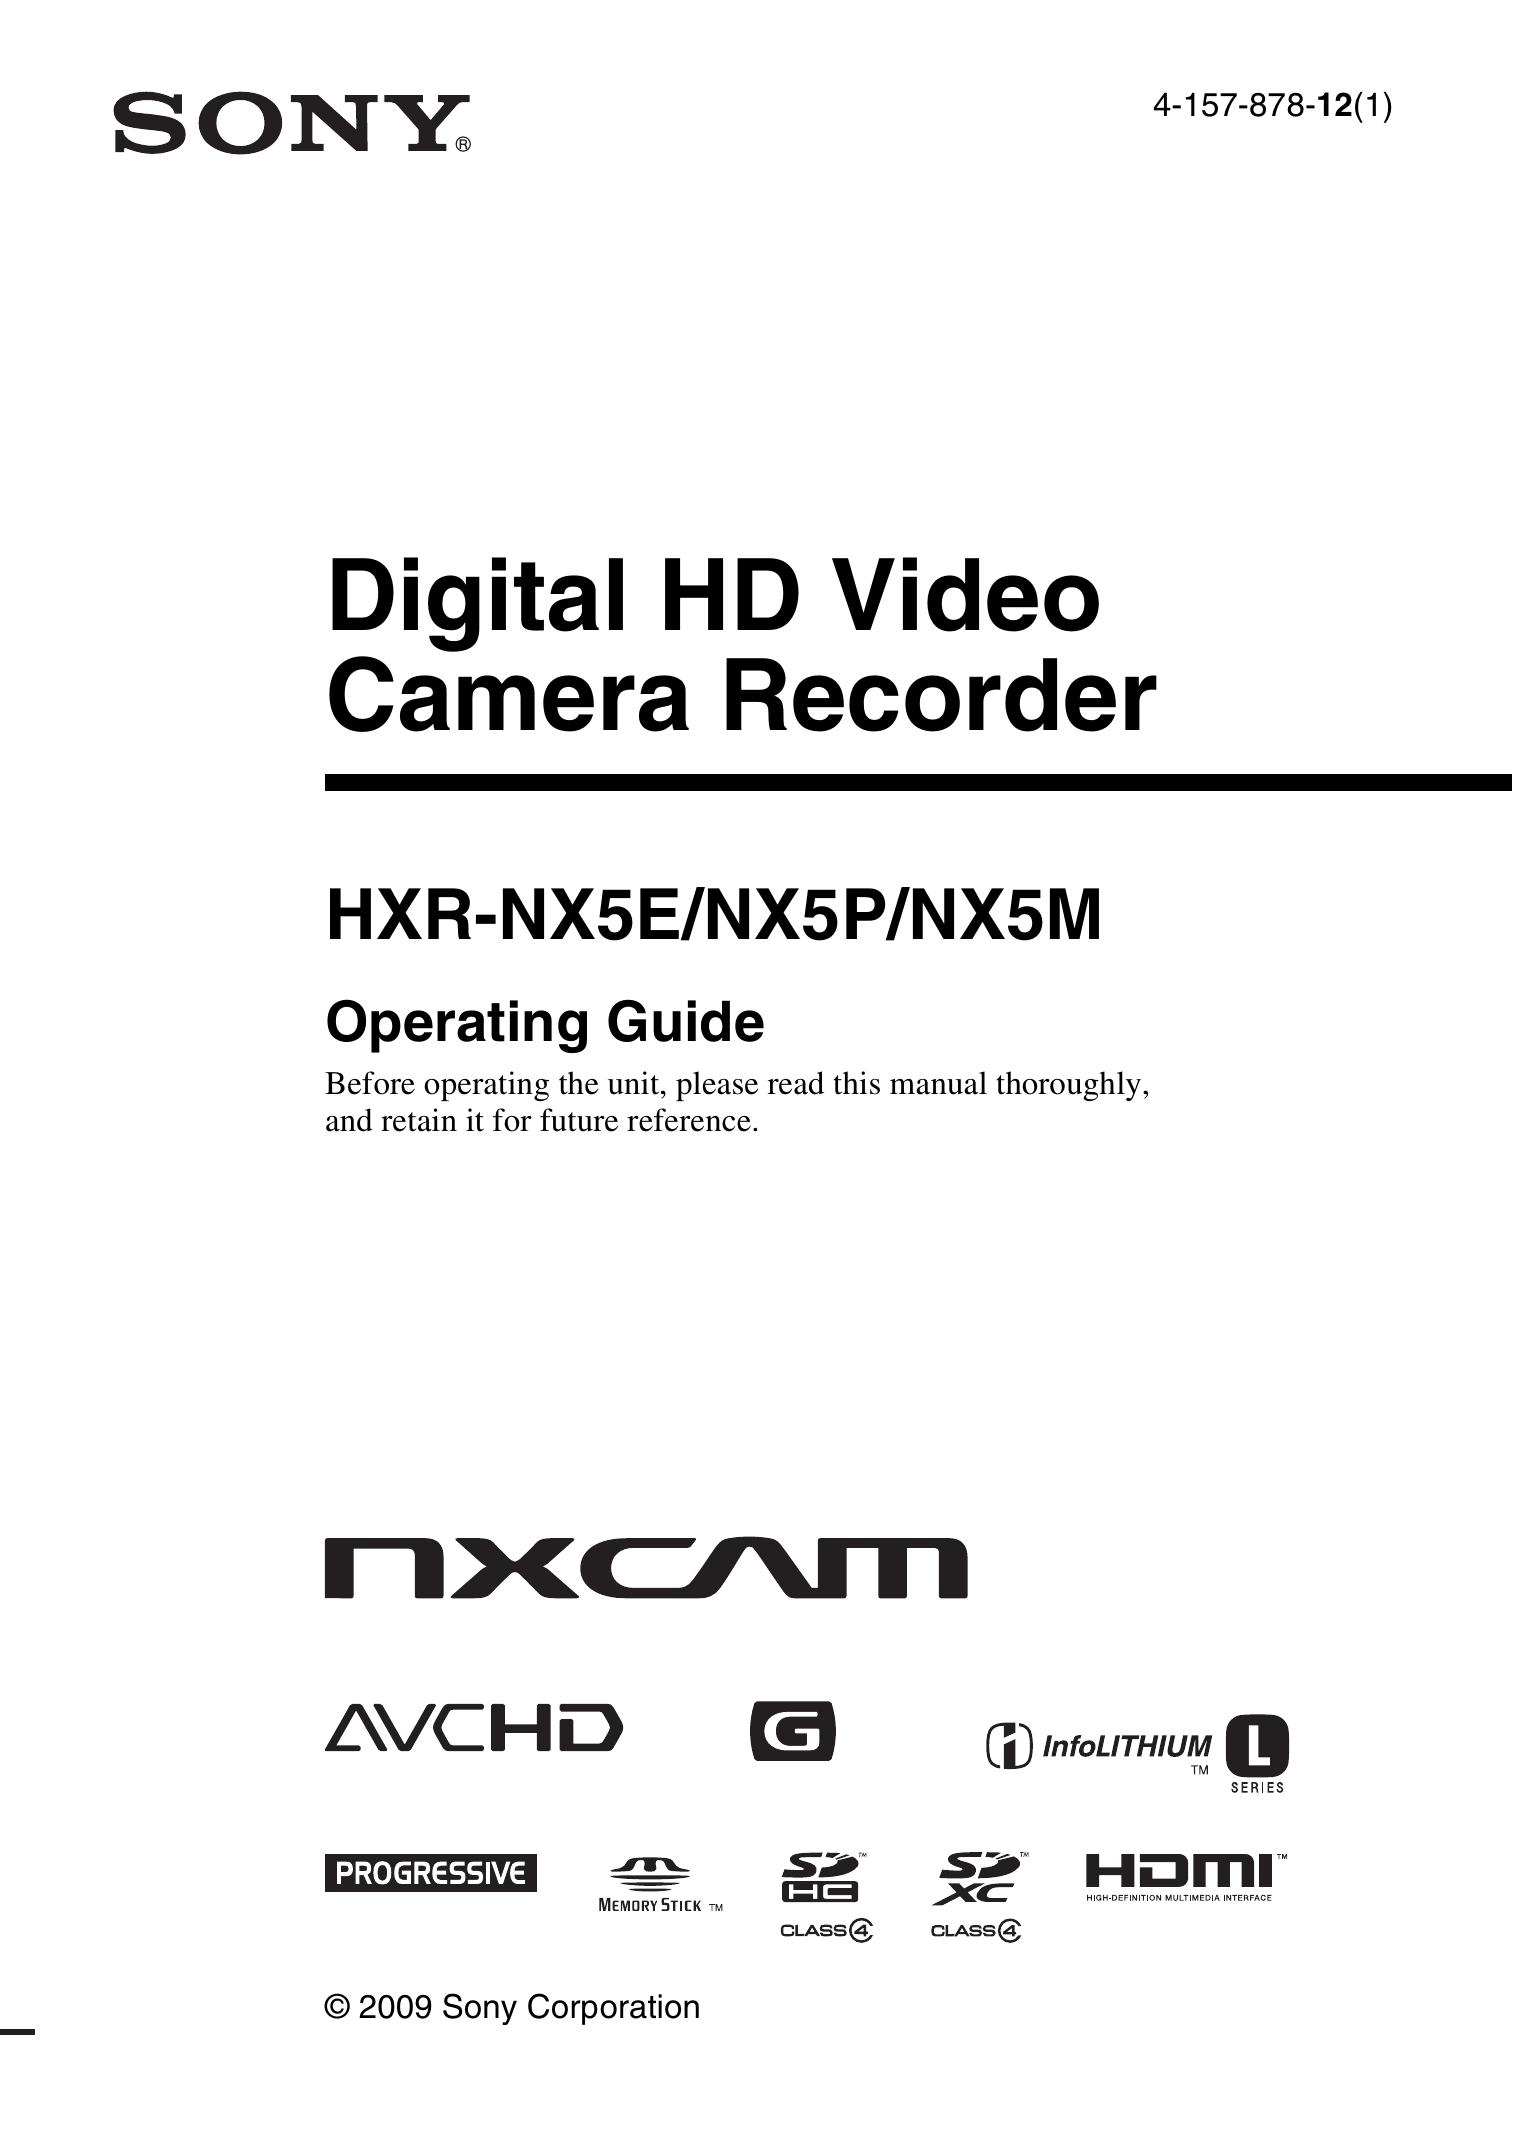 Sony 4-157-878-12(1) Camcorder User Manual